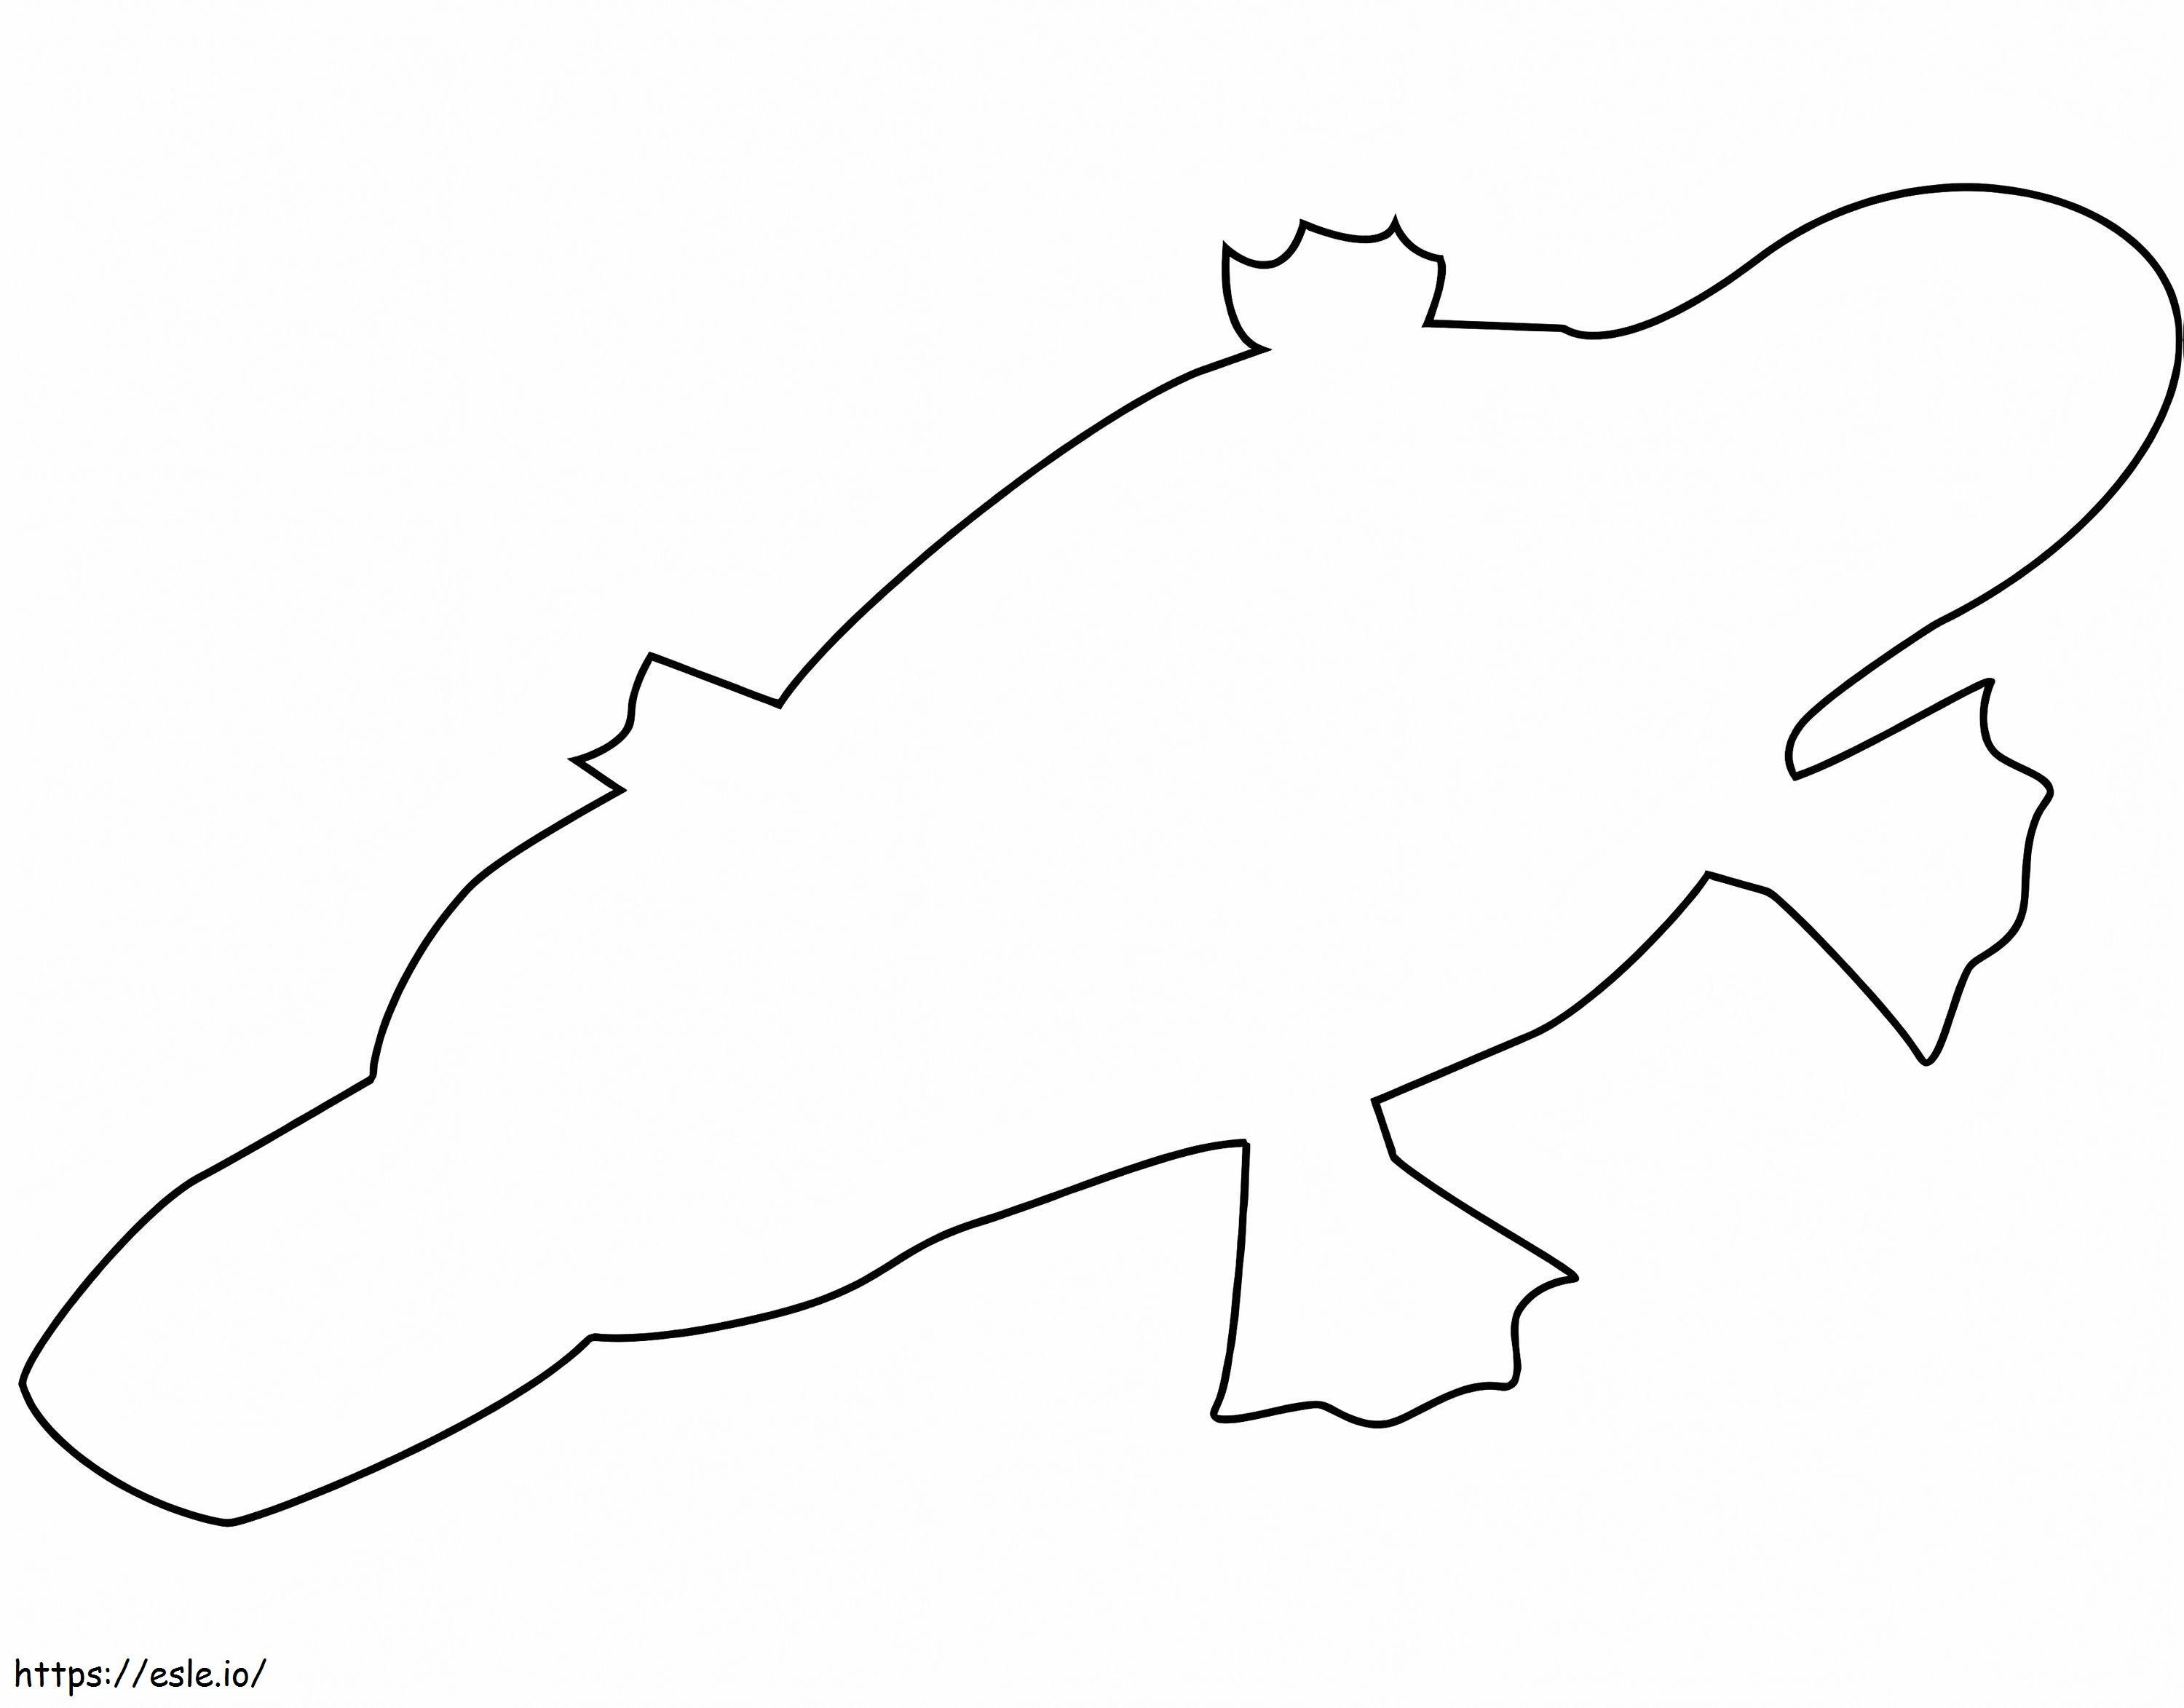 Platypus Outline 1 coloring page